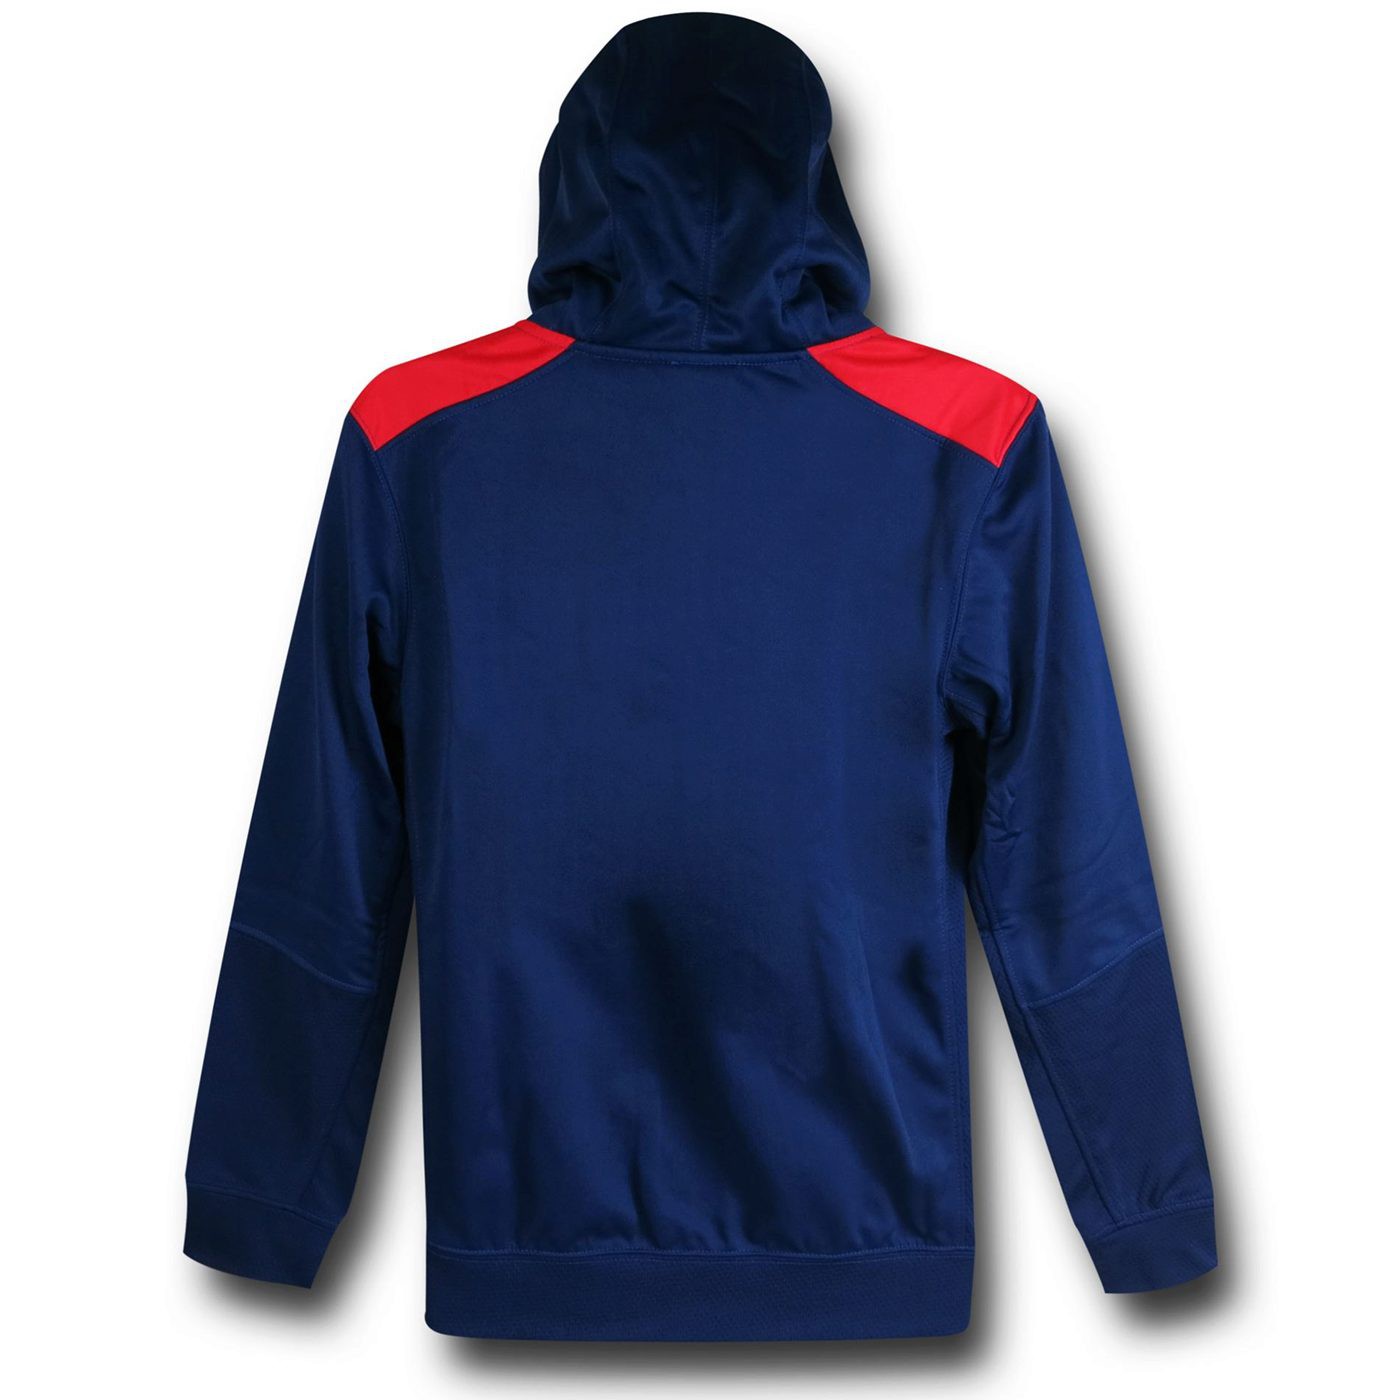 Captain America Incognito Zip-Up Hoodie